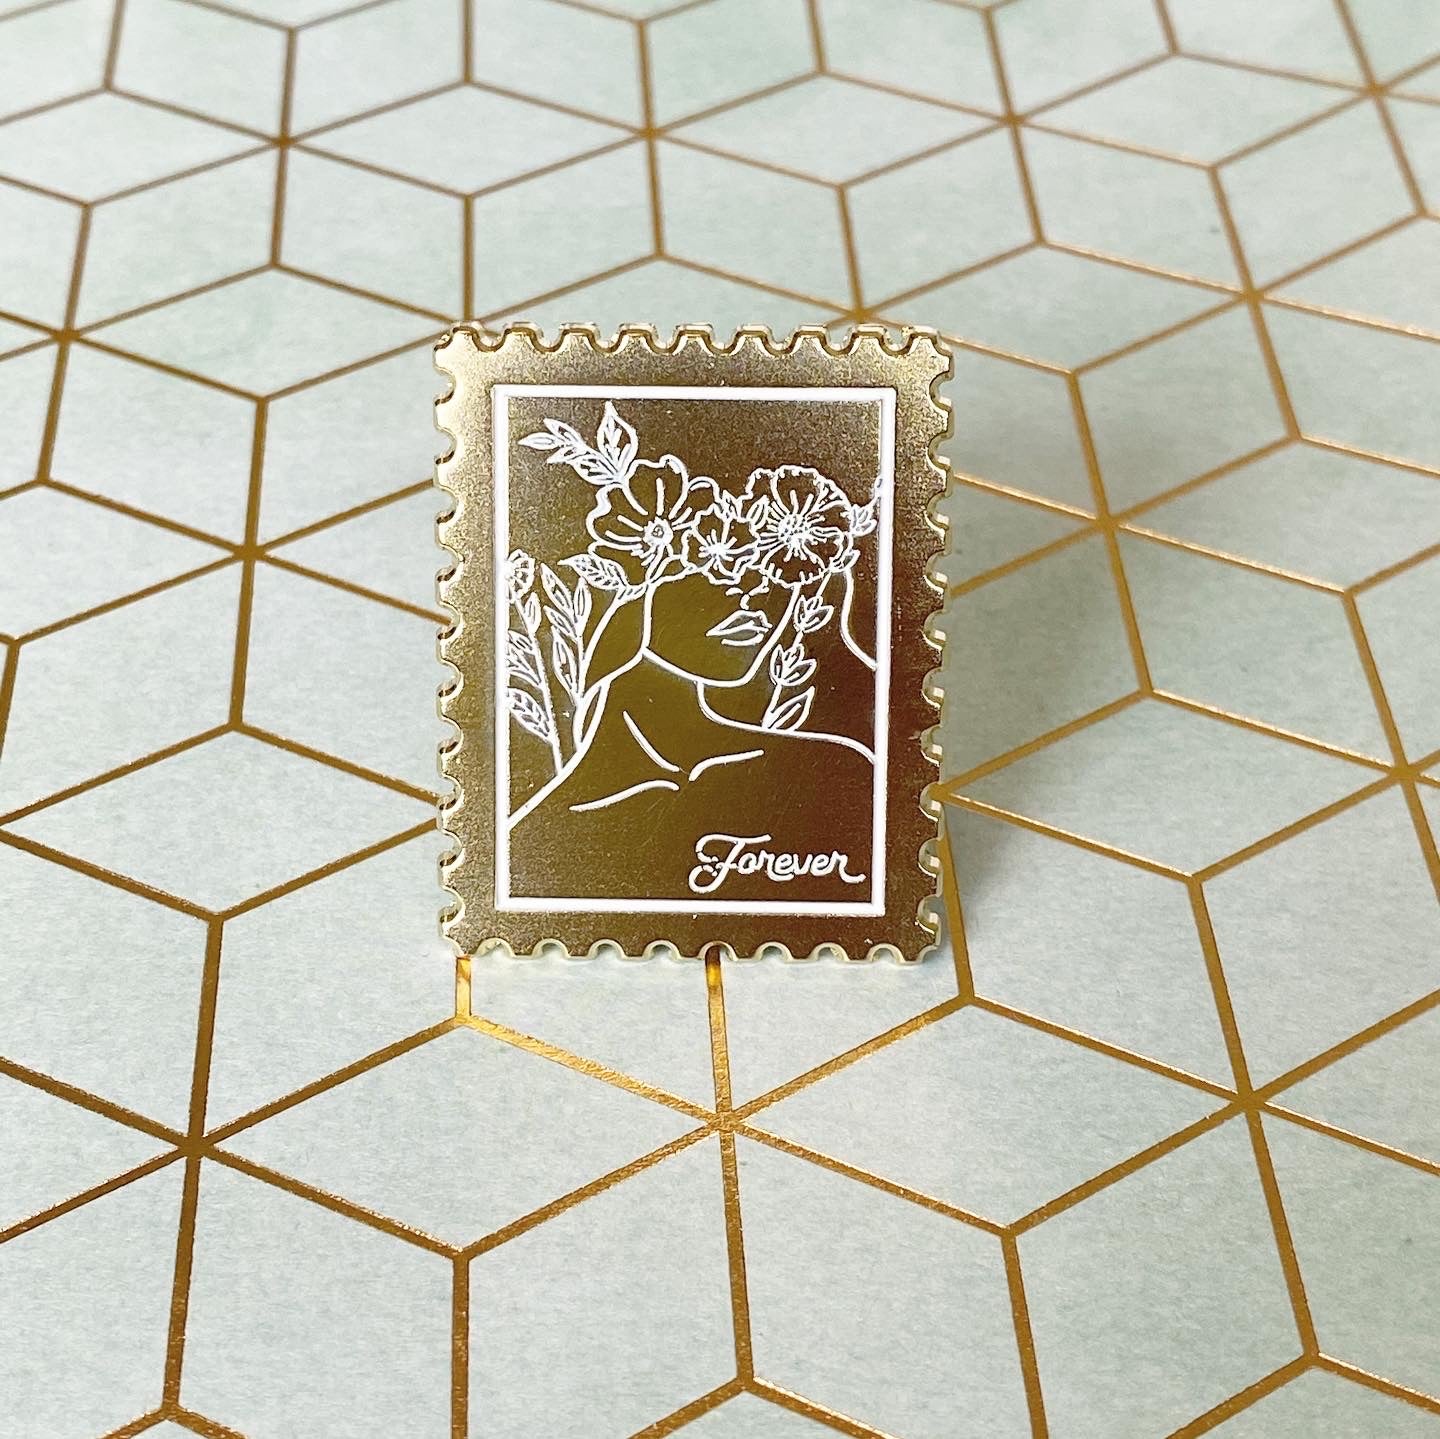 Forever Stamp Pin